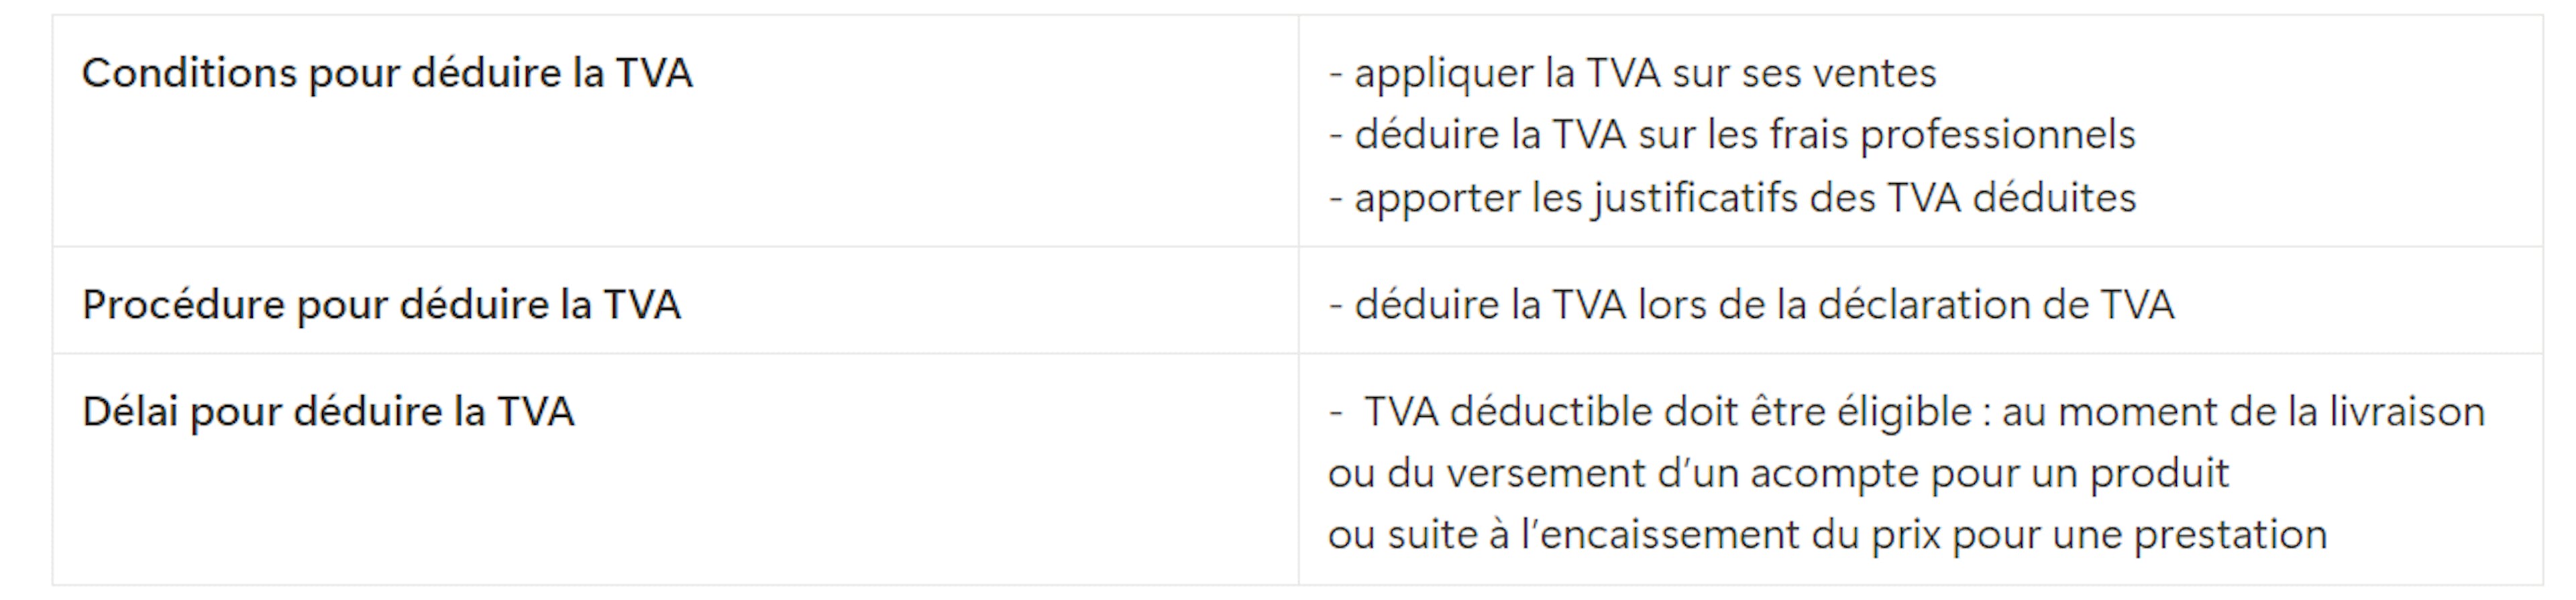 Conditions TVA déductible